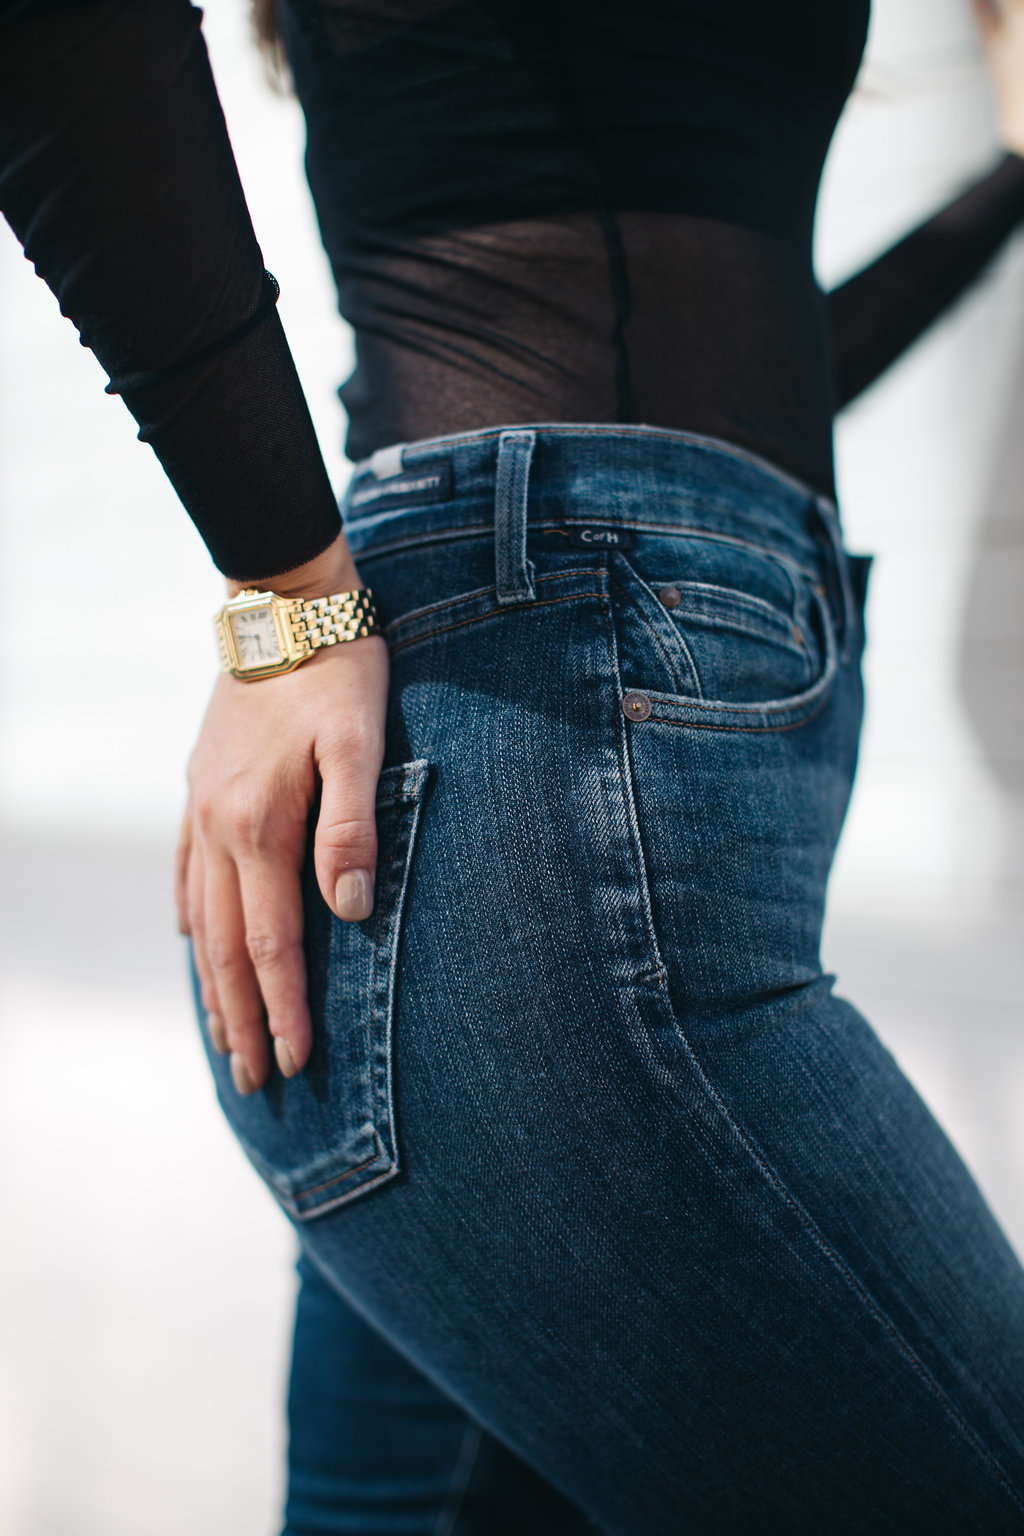 Jenna Boron of Pittsburgh Life and Personal Style blog, Balance and Chaos, wearing Cartier Panthère watch and discussing goal setting for 2018